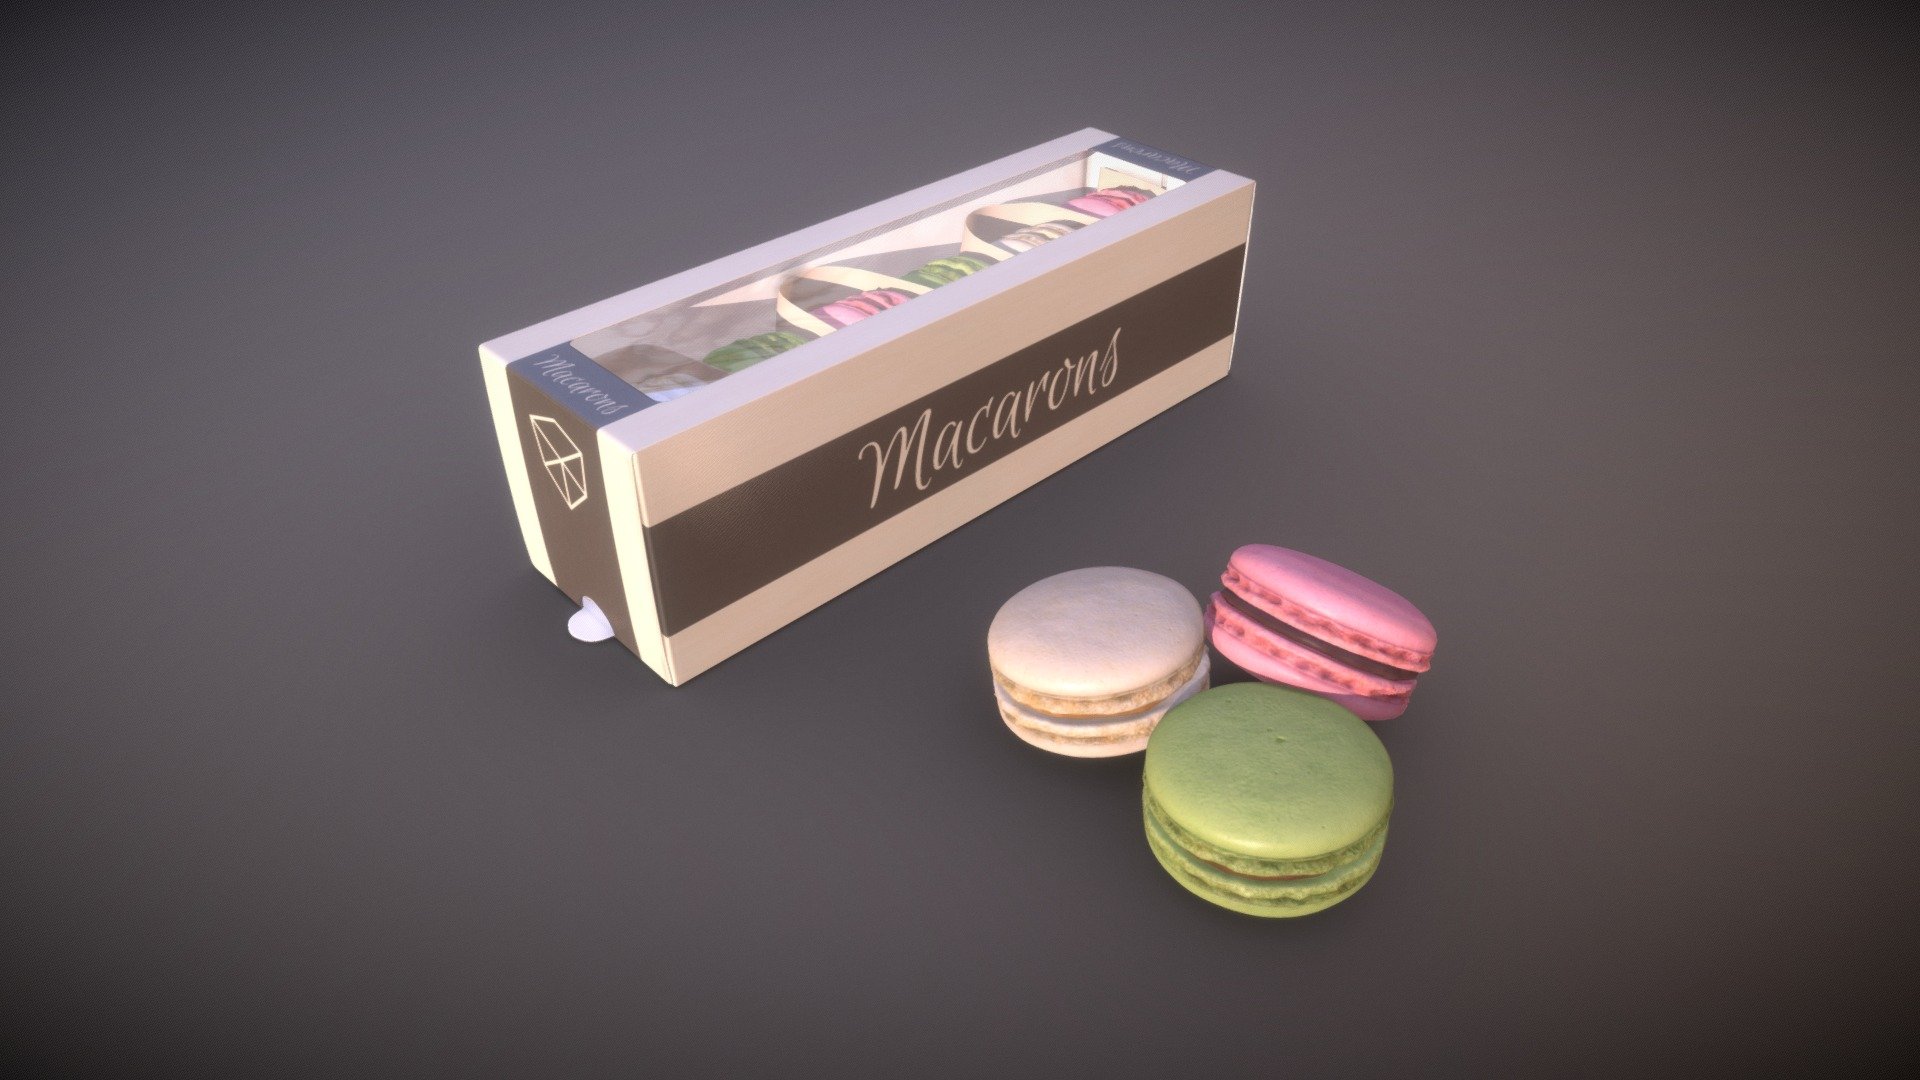 Macarons Box Pack

Native format is .blend




Realistic model

Scene ready to render in Blender3D (2.81 and above) (Cycles, Eevee)

Box has an armature rig

Clean geometry, UV unwrapped

FBX, ABC, DAE and OBJ formats available

Hand sculpted, three different macaron cookies

Units: metric

Low poly optimized macarons

Macaron dia: ~ 4 cm

Box Dimensions: 19.4 x 5.5 x 5.5 cm

Polygonal count of one macaron: 2752 faces

Polygonal count of box: 7704 faces (subdivision level 1)

Polygonal count of box: 1920 faces (lowpoly)

Polygonal count of box: 829 faces (base mesh without modifiers)

Box with six macarons 34012 faces (subdivision level 1)

Box with six macarons: 21968 faces (low poly)

Default scene: 42524 faces (subdivision level 1)

Default scene: 30480 faces (low poly)

PBR Specular workflow

Textures: 2k macarons, 4k box

Materials and textures included.

Blend files has packed textures
Enjoy! More models available on my page. Thank You!
 - Macarons Box Pack - 3D model by nacl 3d model